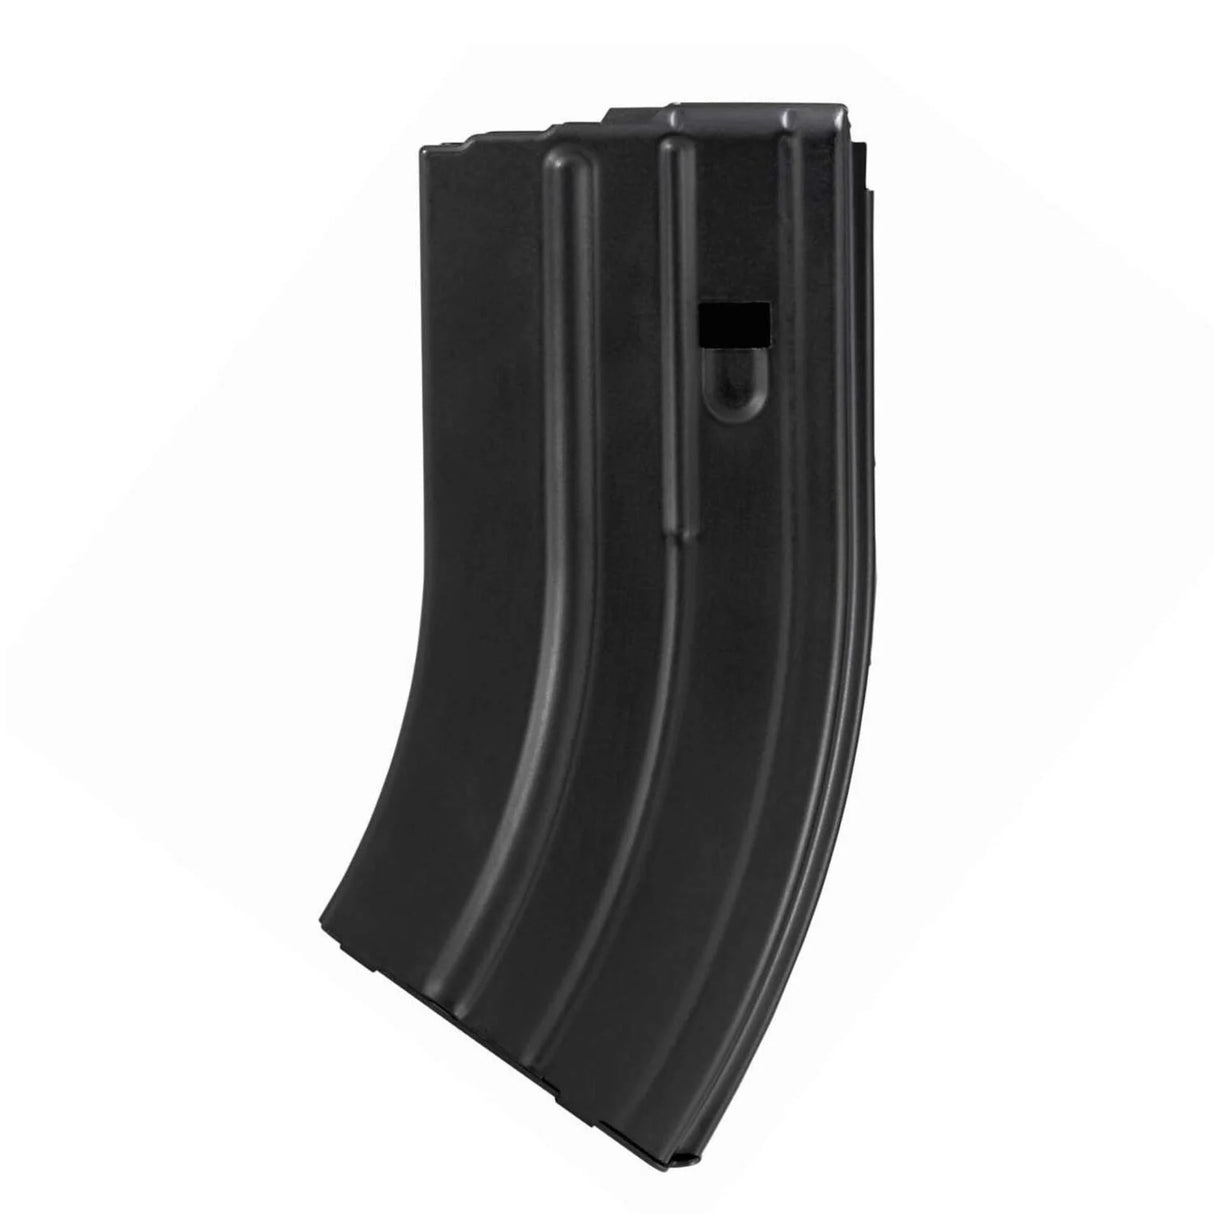 C PRODUCTS DEFENSE DURAMAG AR MAG 7.62x39 20RDS MAGS / BLOCKED TO 5 STS